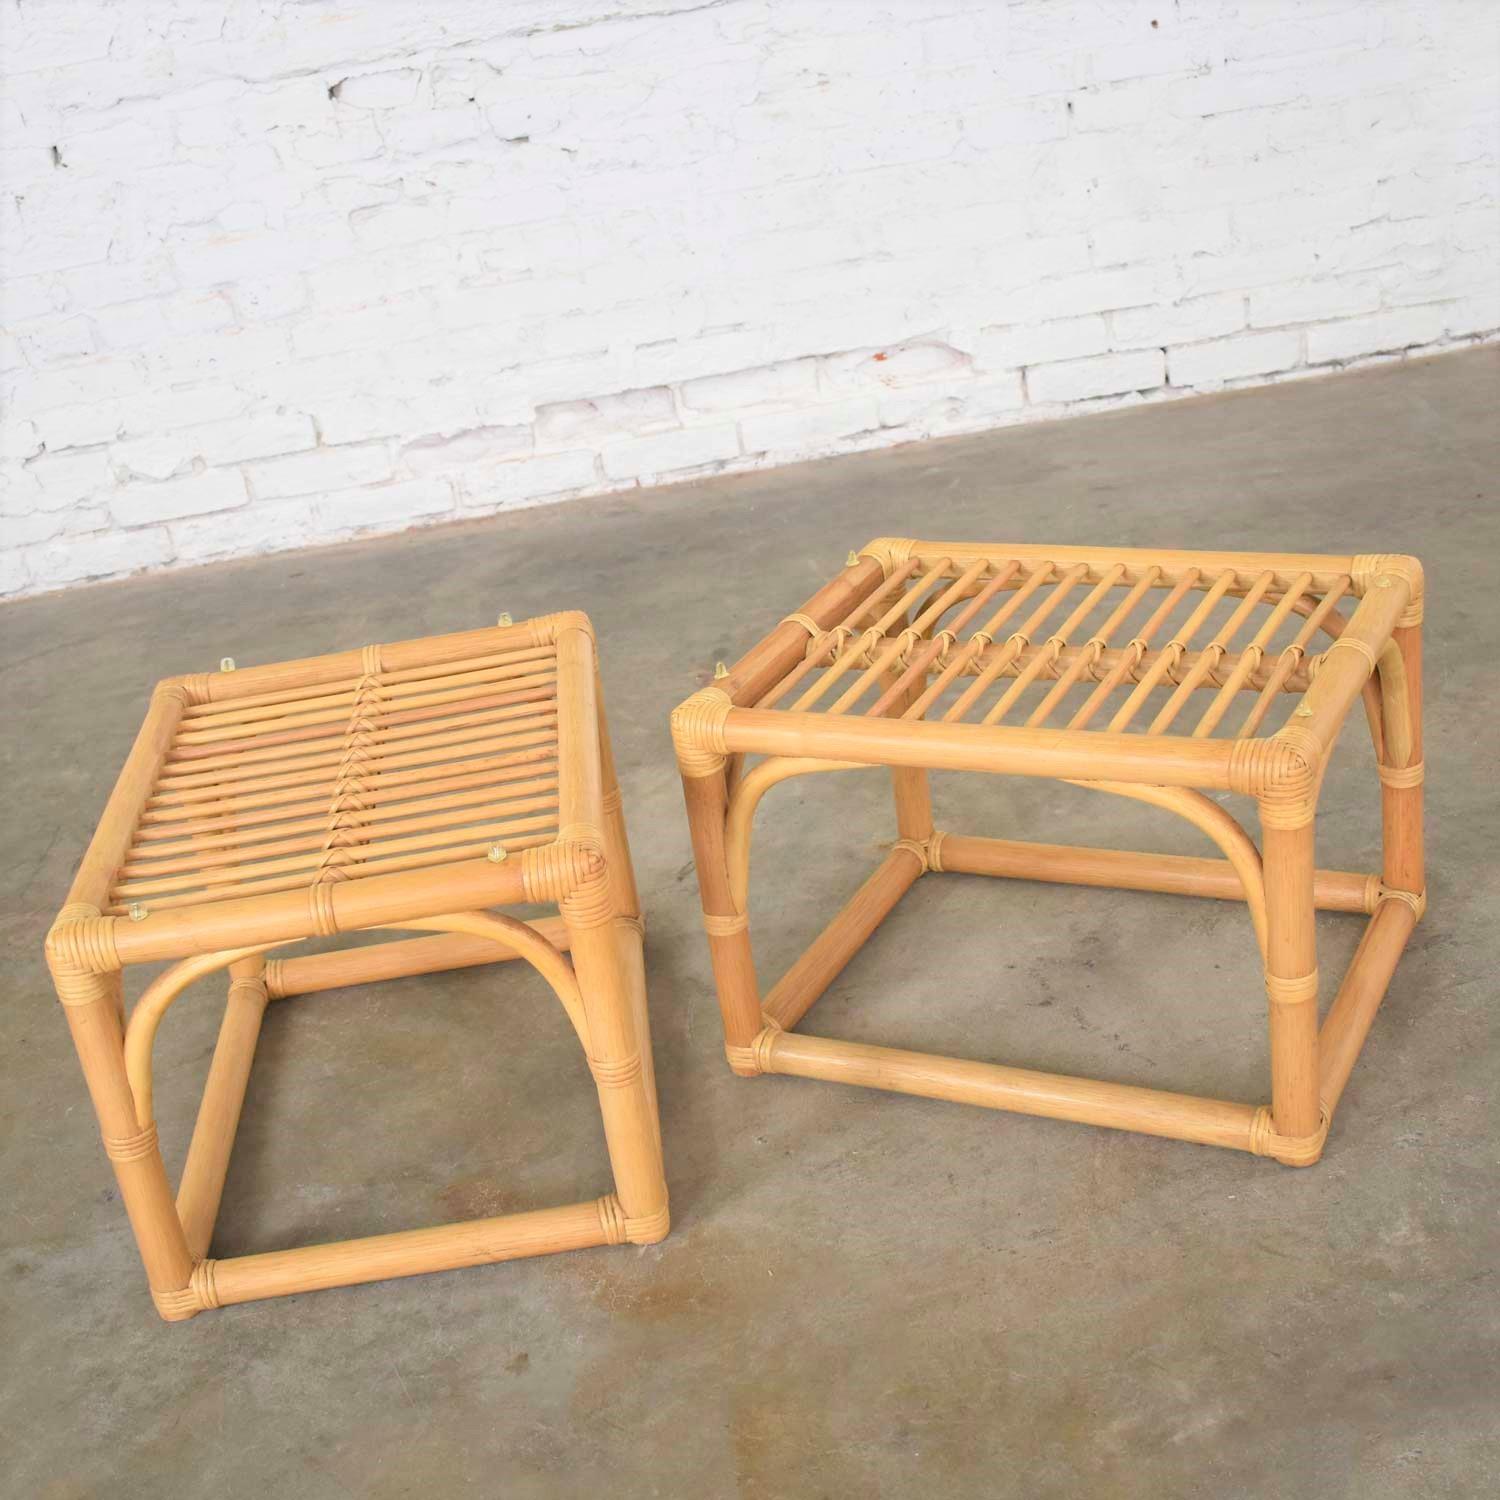 Vintage Modern Pair of Rattan Rectangular Side Tables or End Tables w/ Glass Top For Sale 3